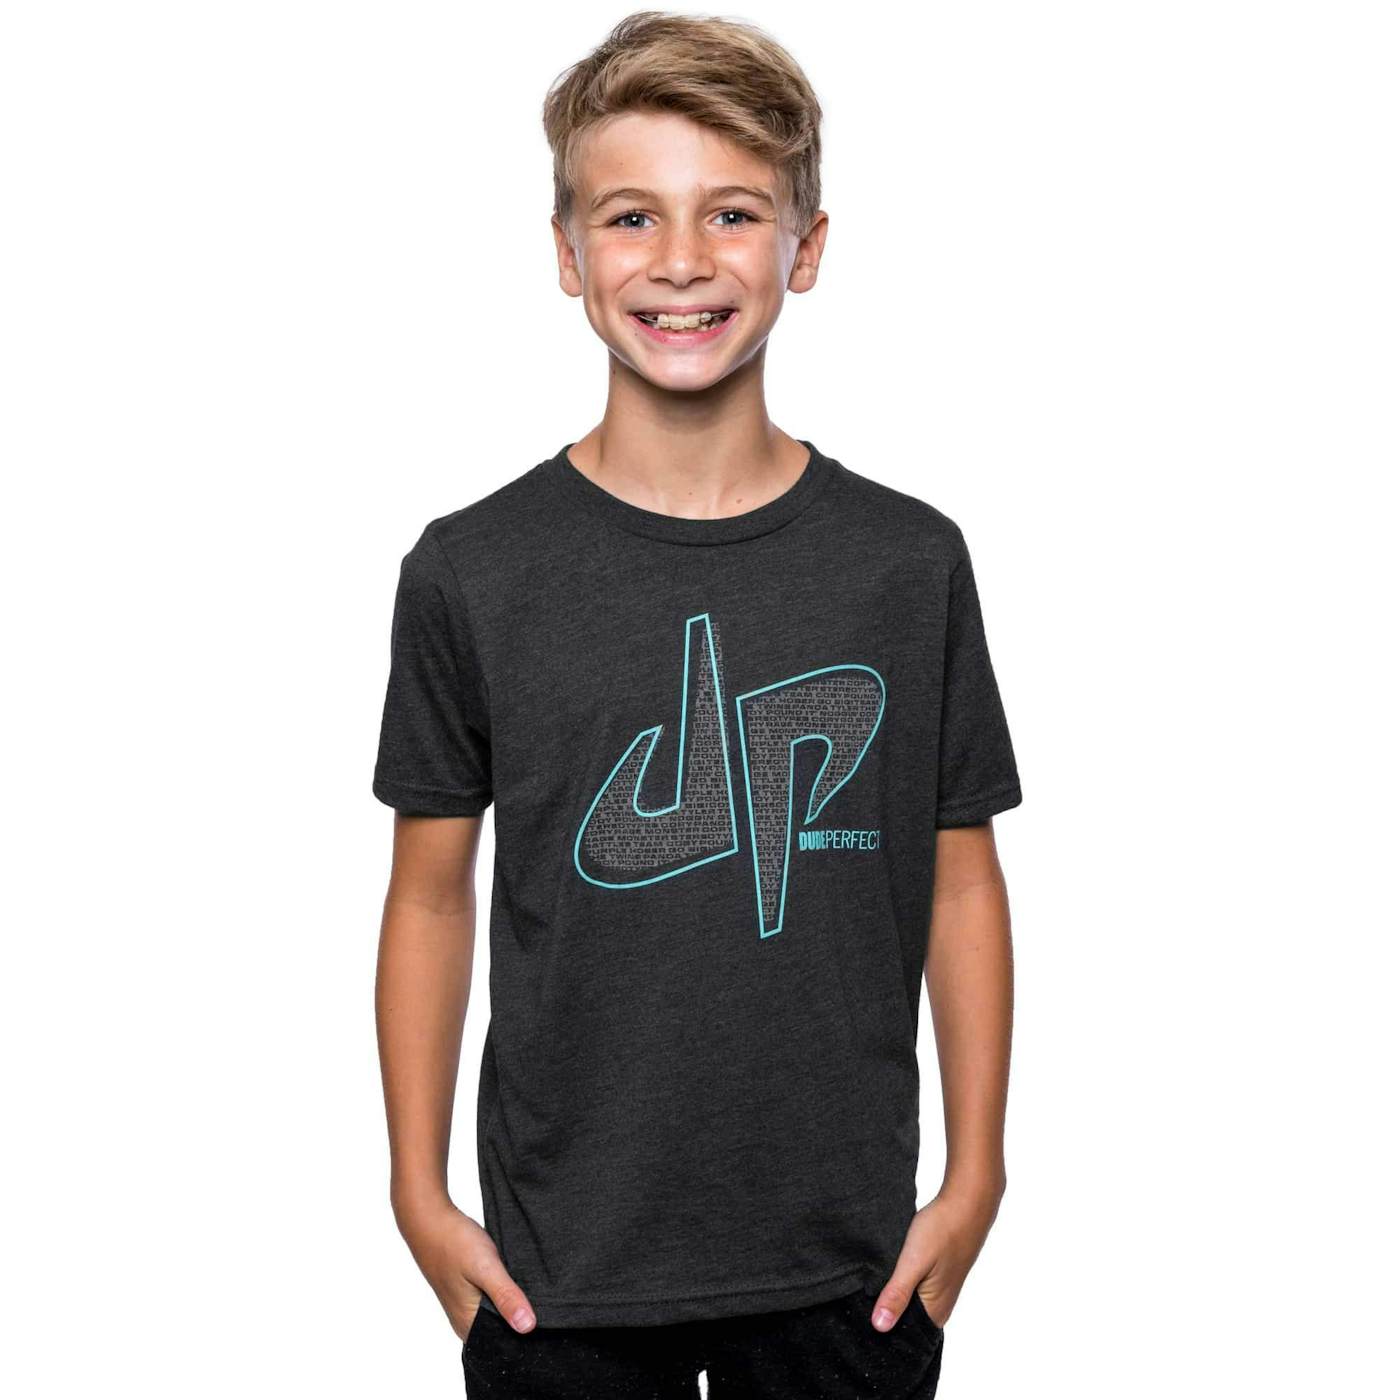 Dude Perfect Pound It Reflective Tee